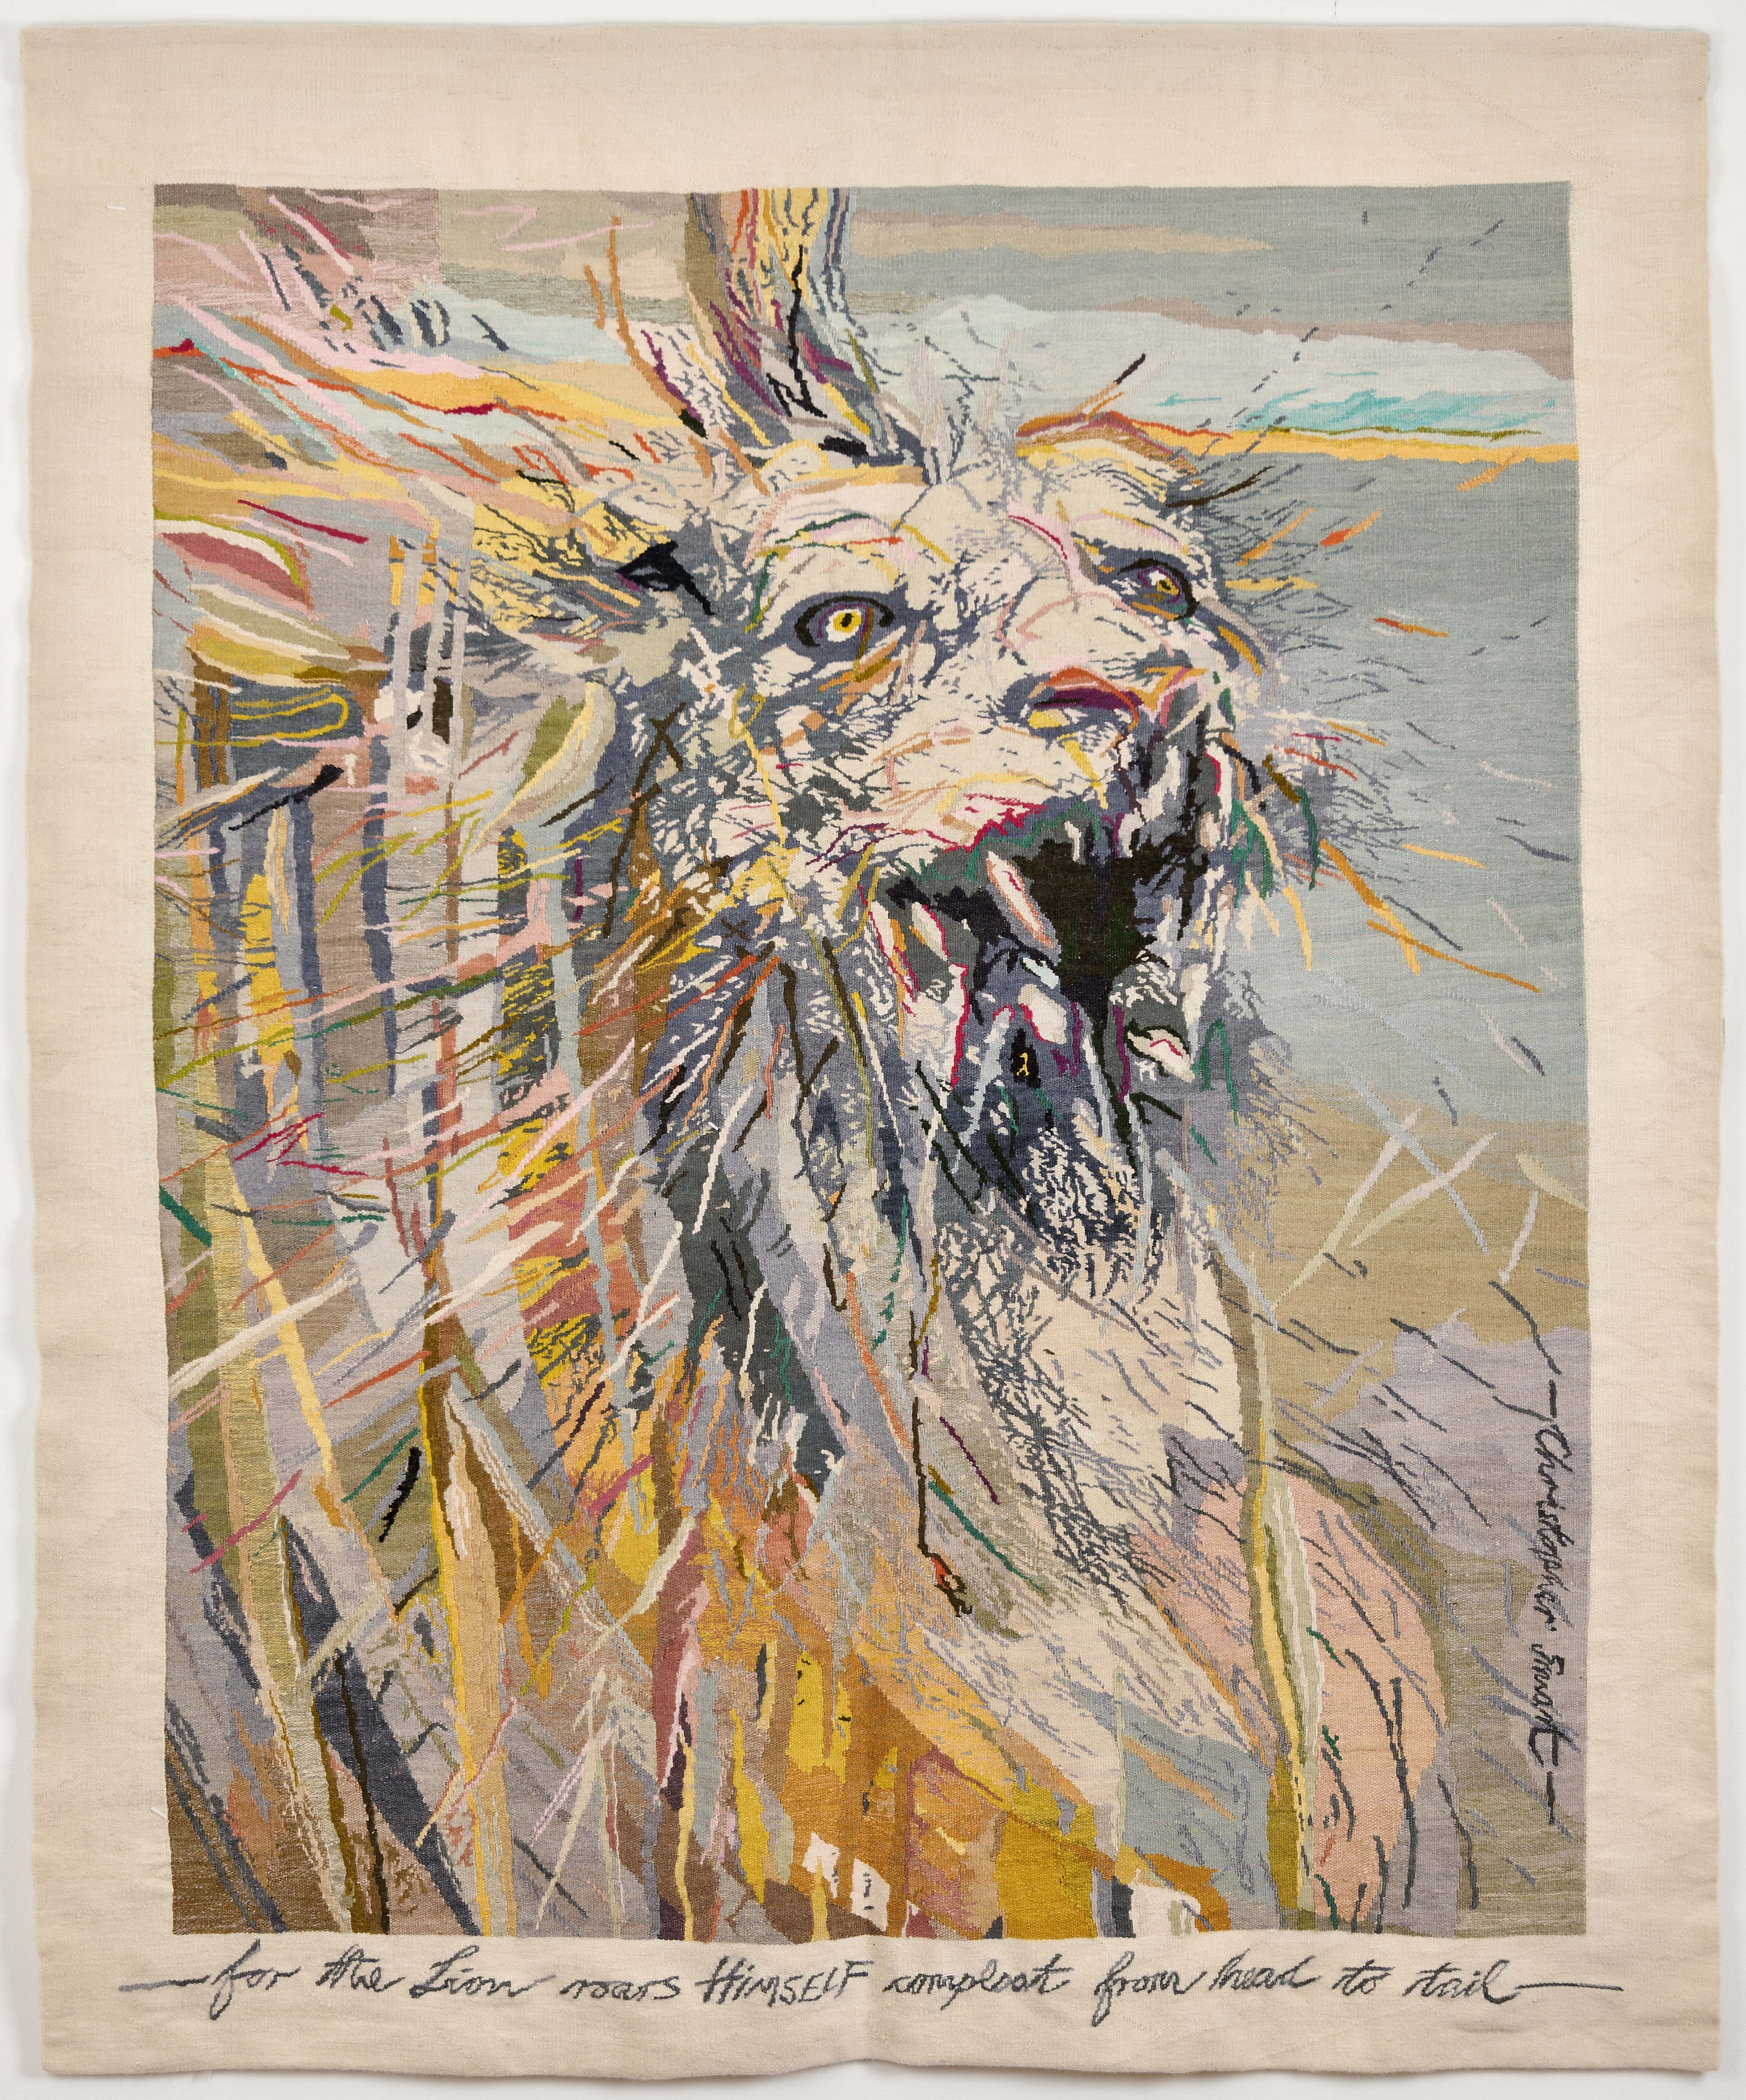 Judith Mason &amp;amp; Marguerite Stephens&amp;nbsp;

The Lion &amp;quot;Roars himself Compleat&amp;quot;, 2012/2019

Woven mohair

232 x 194 cm (91.3 x 76.4 in)

Edition 4 of 5

&amp;nbsp;